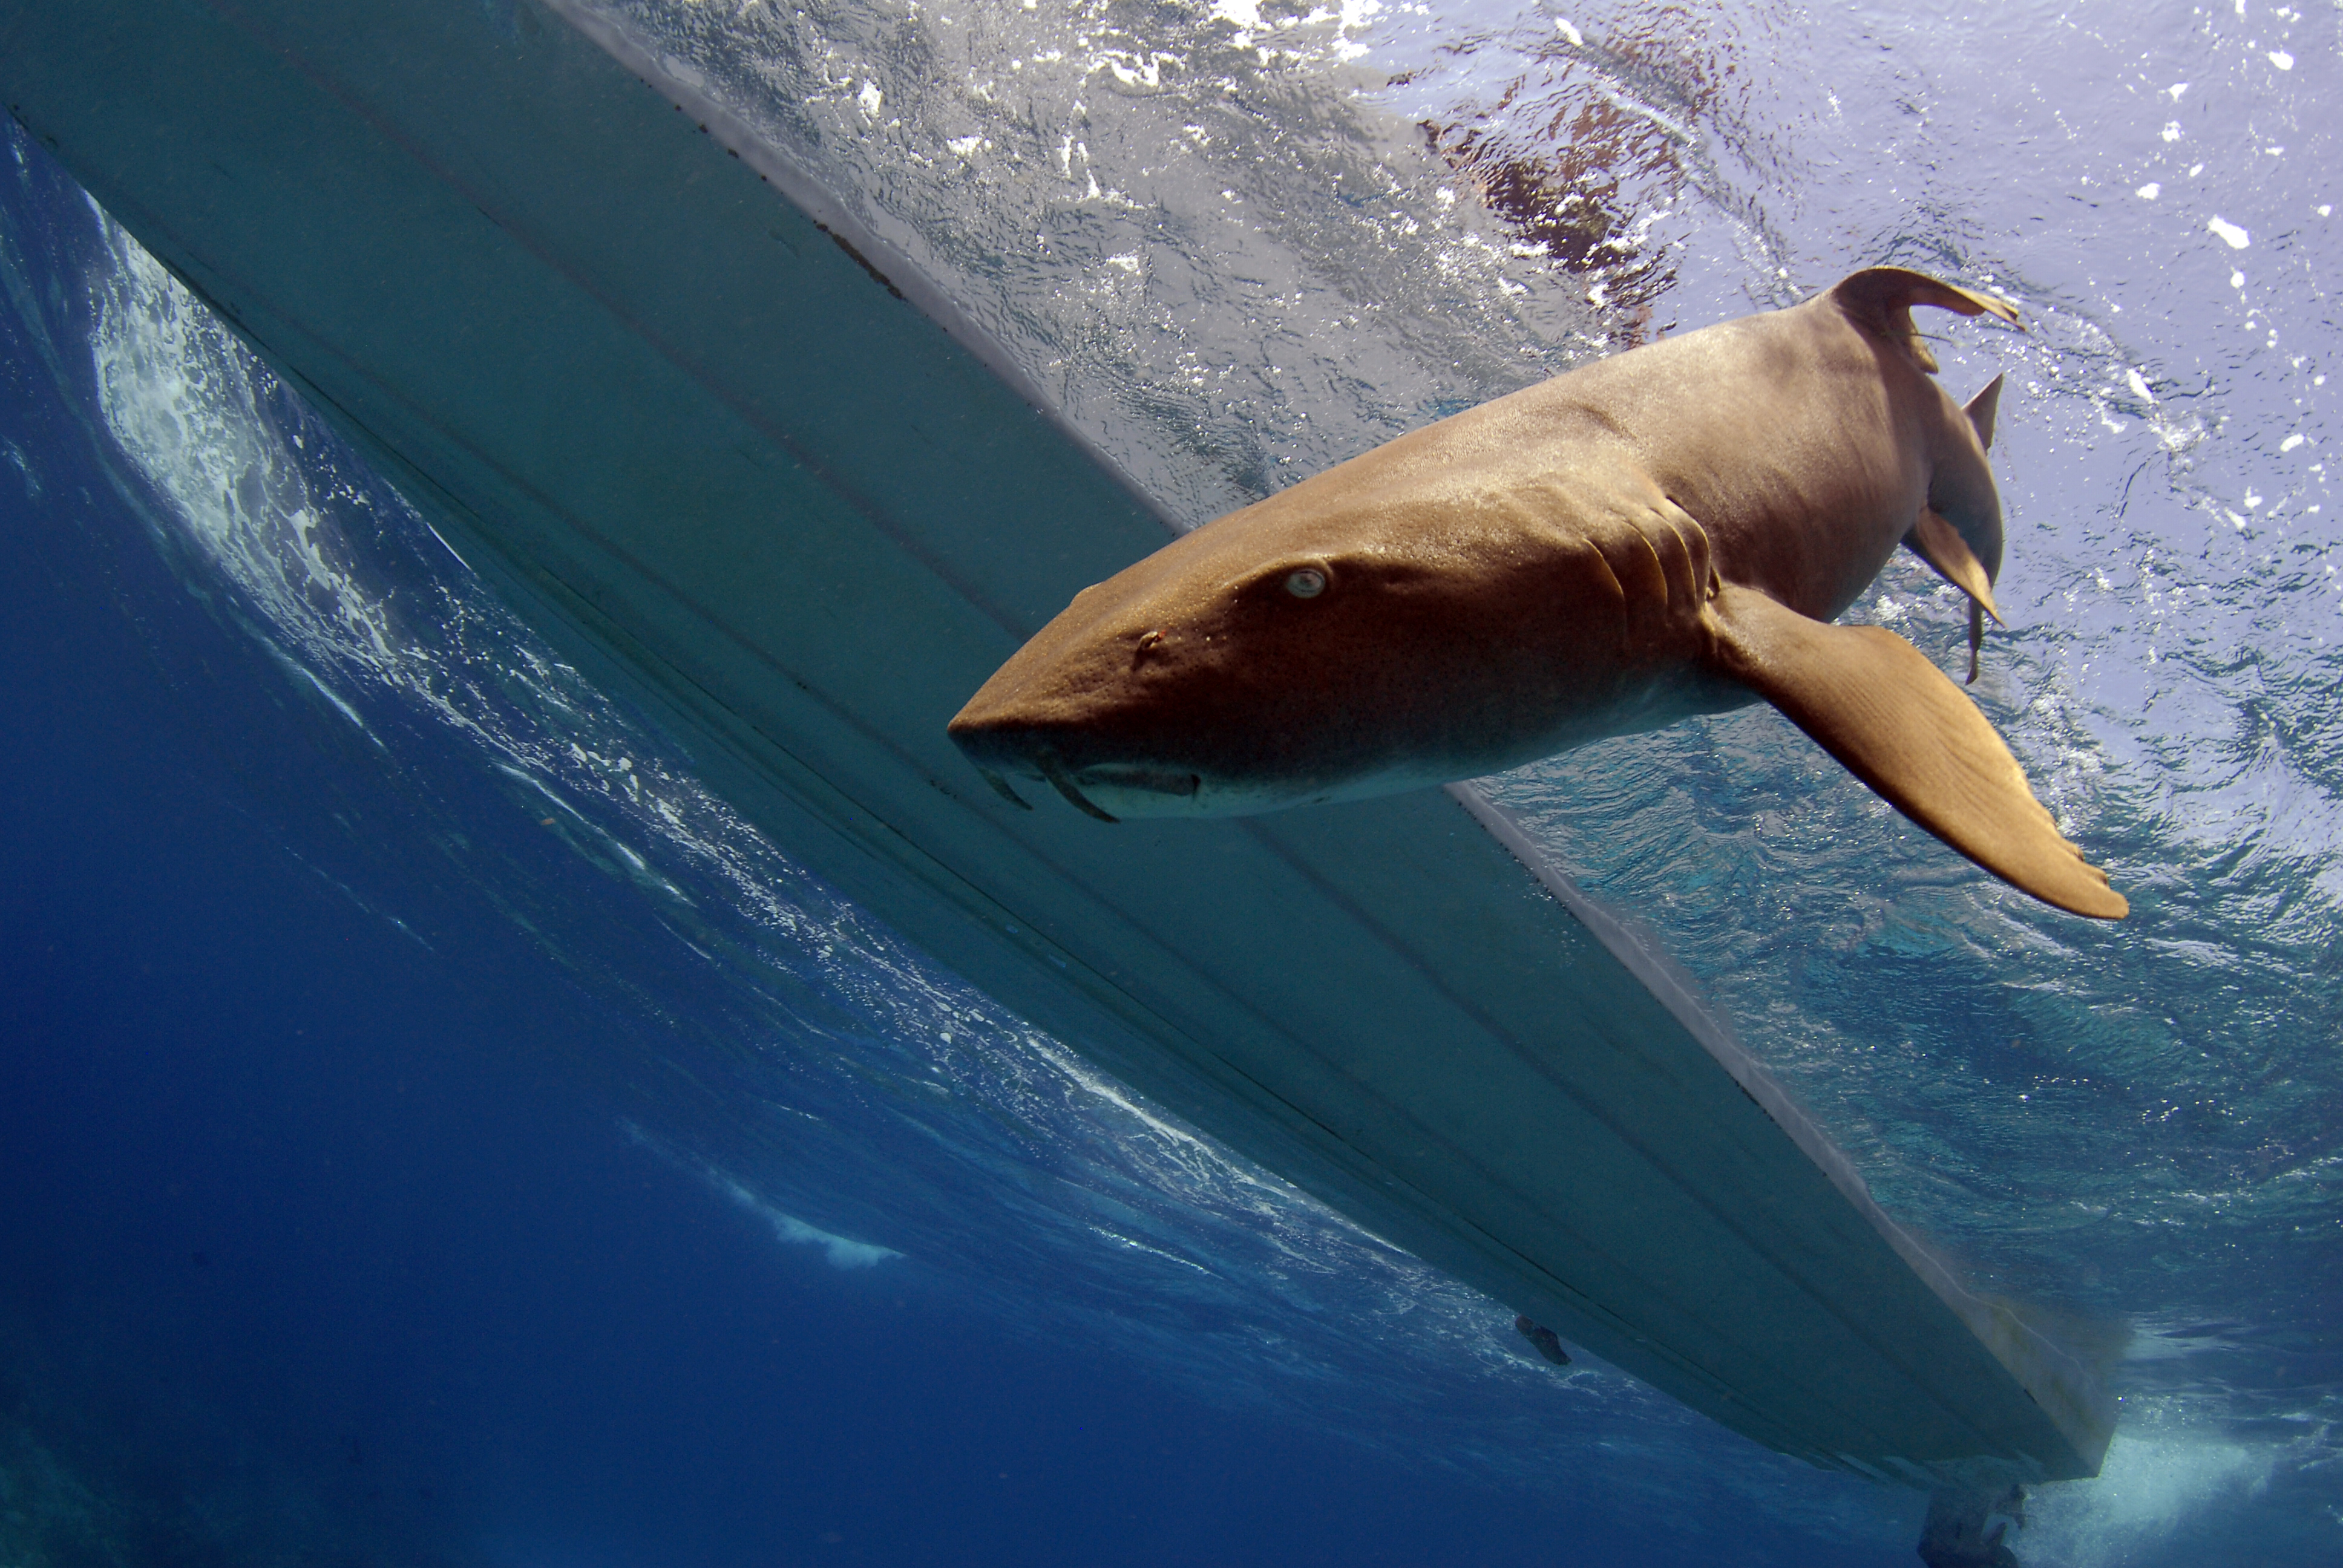 A nurse shark swims in the water near the research boat.